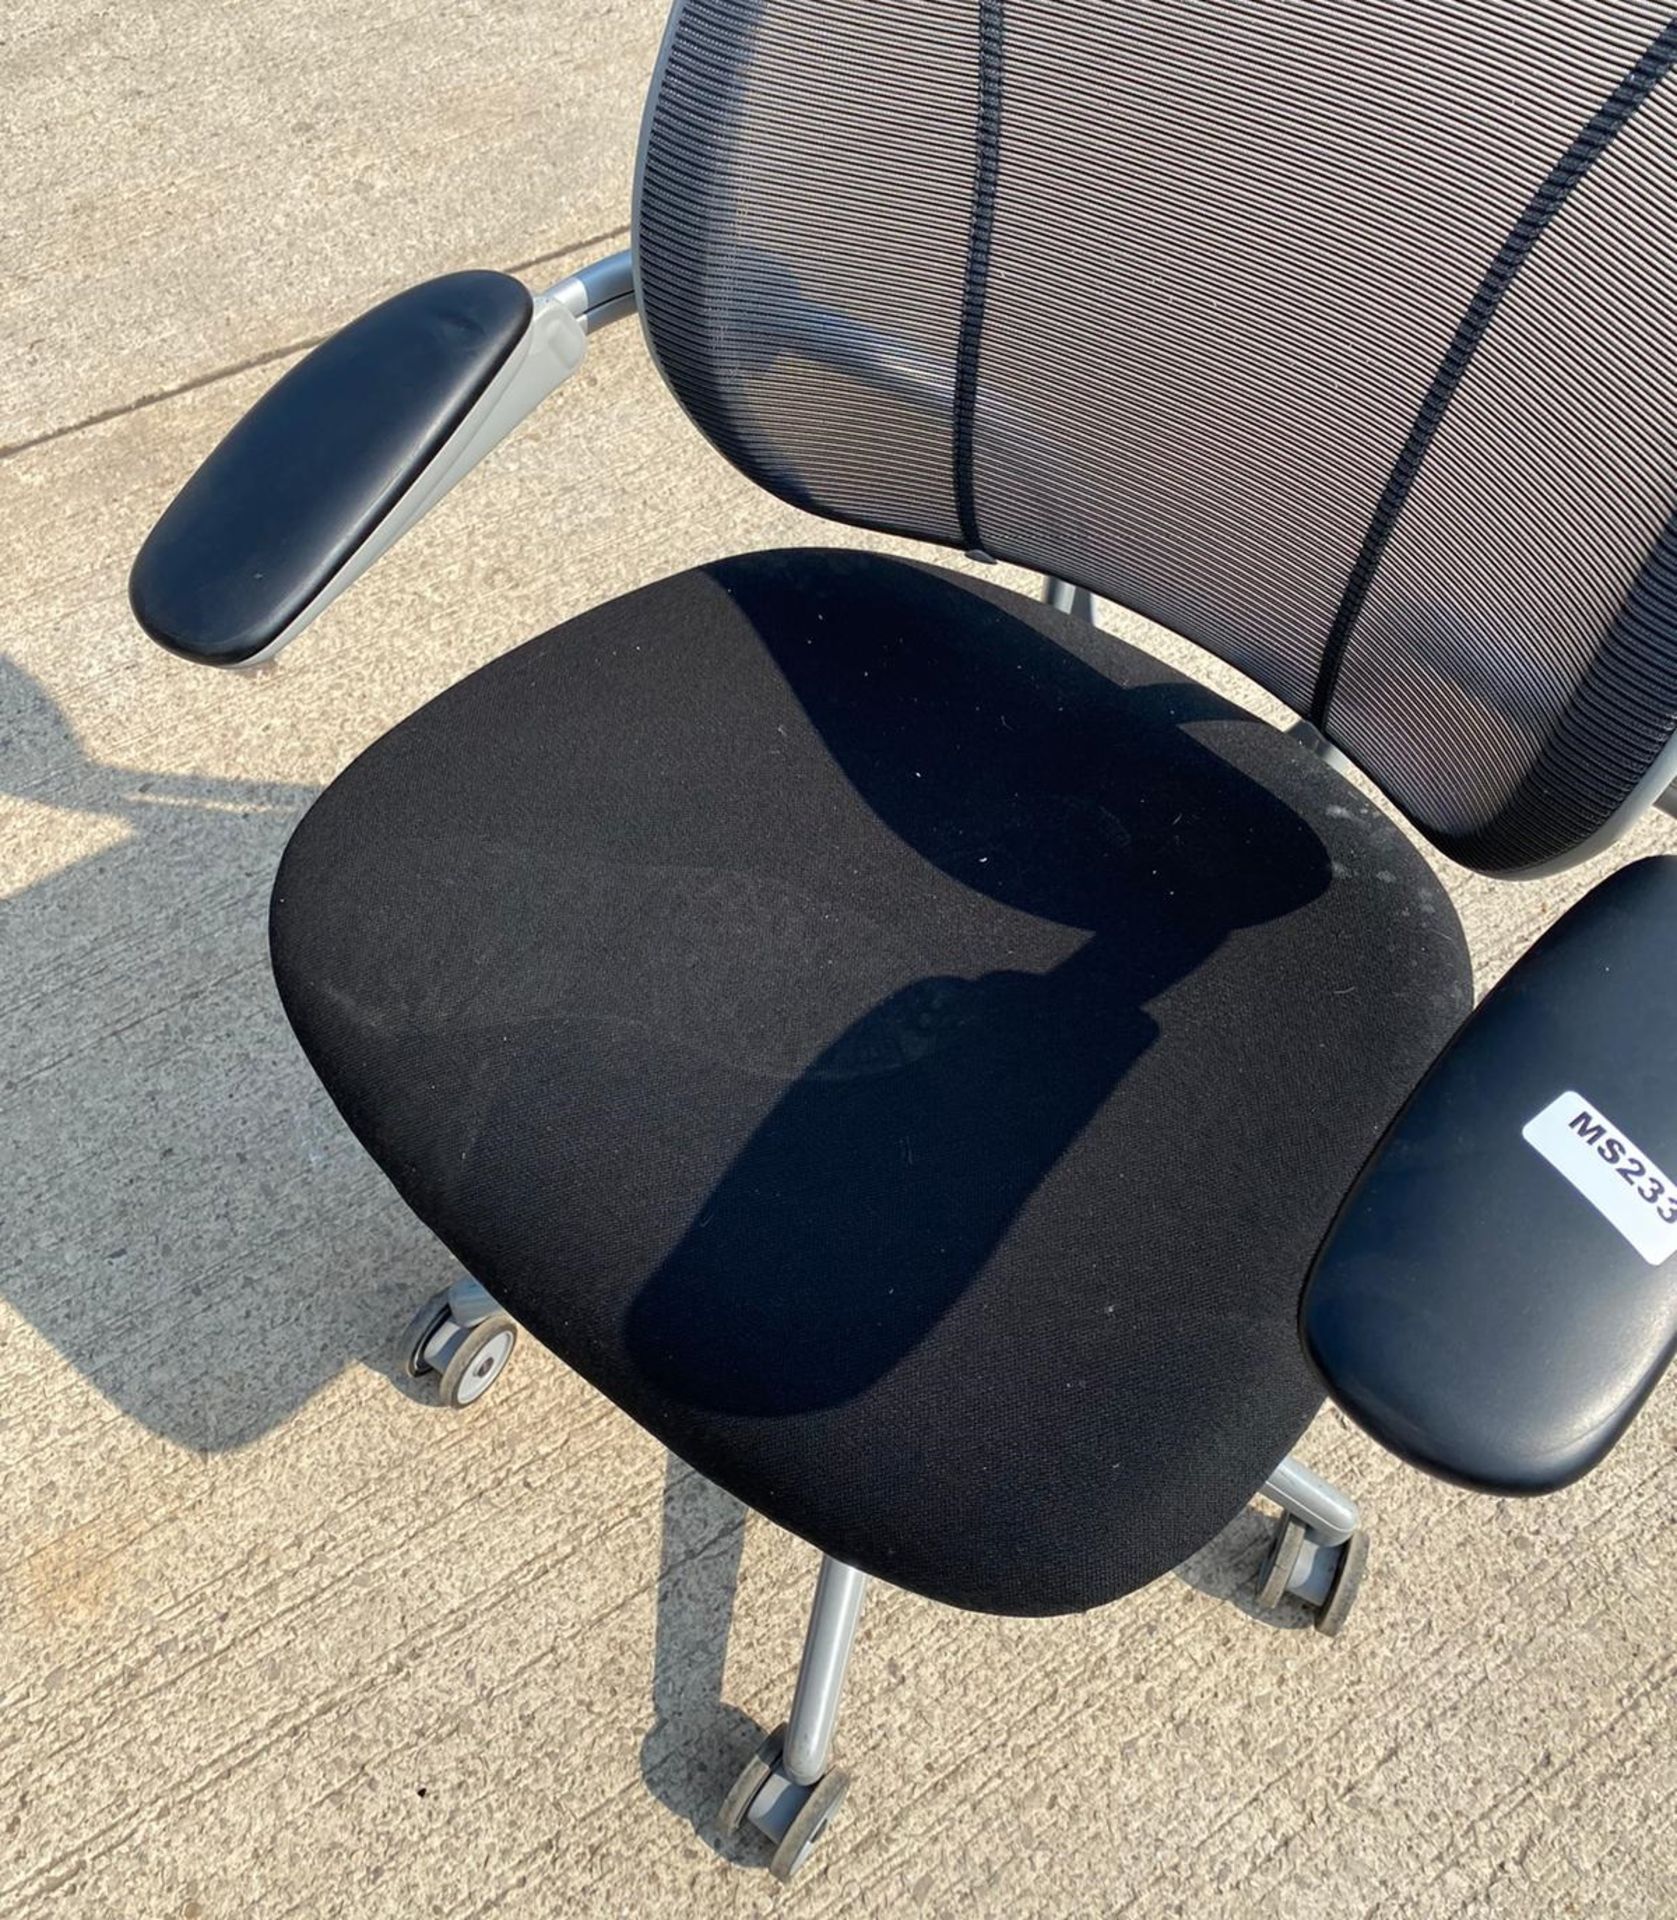 1 x Humanscale Liberty Task Chair in Black and Grey - Used Condition - Location: Altrincham WA14 - - Image 4 of 11